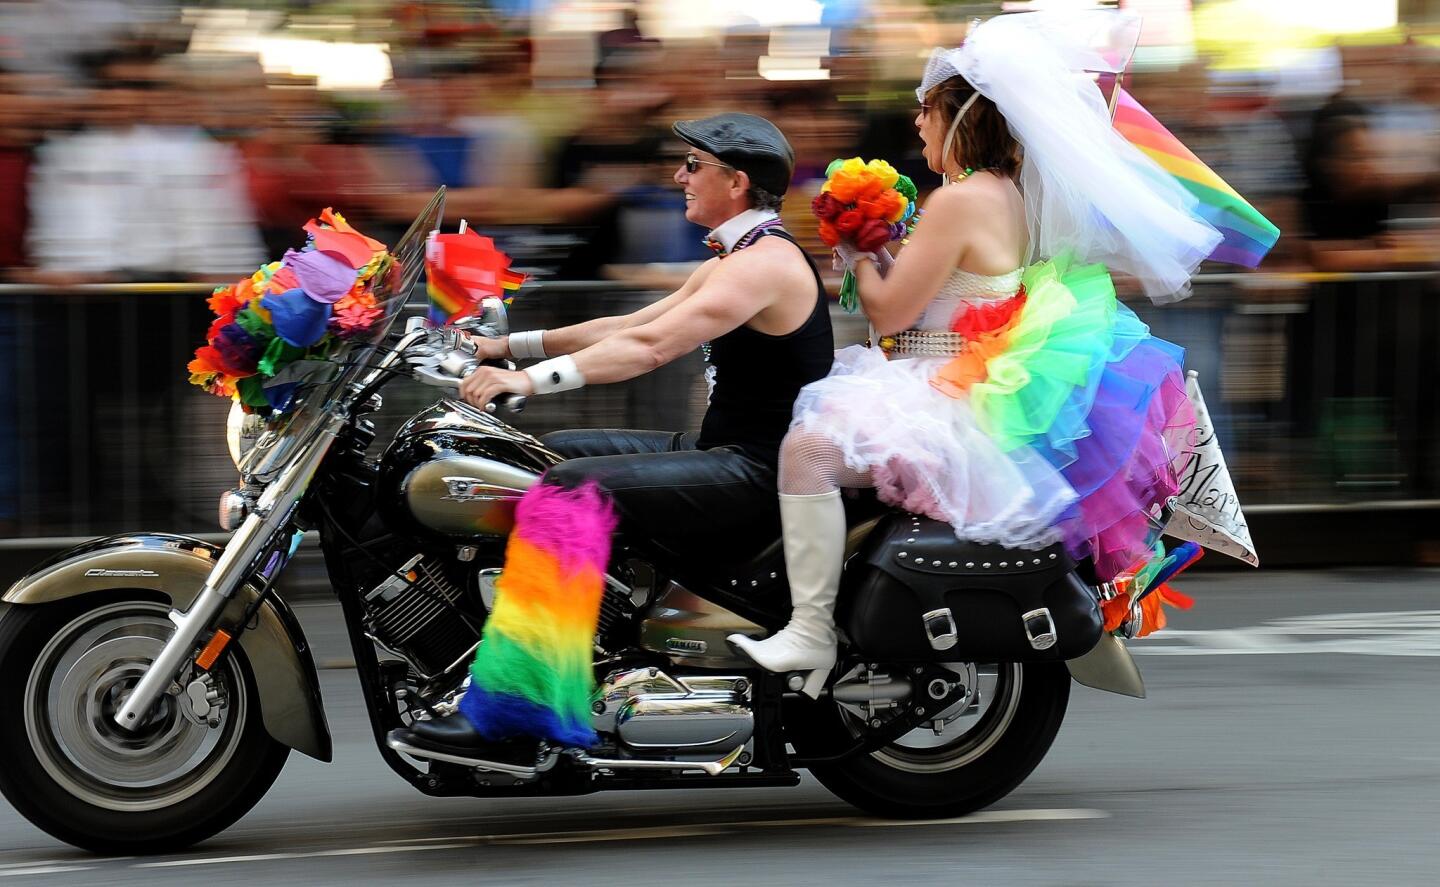 A couple rides down Market Street with a just married sign attached to the motorcycle. In light of the Supreme Court rulings, marriage themes were a big part of the parade.